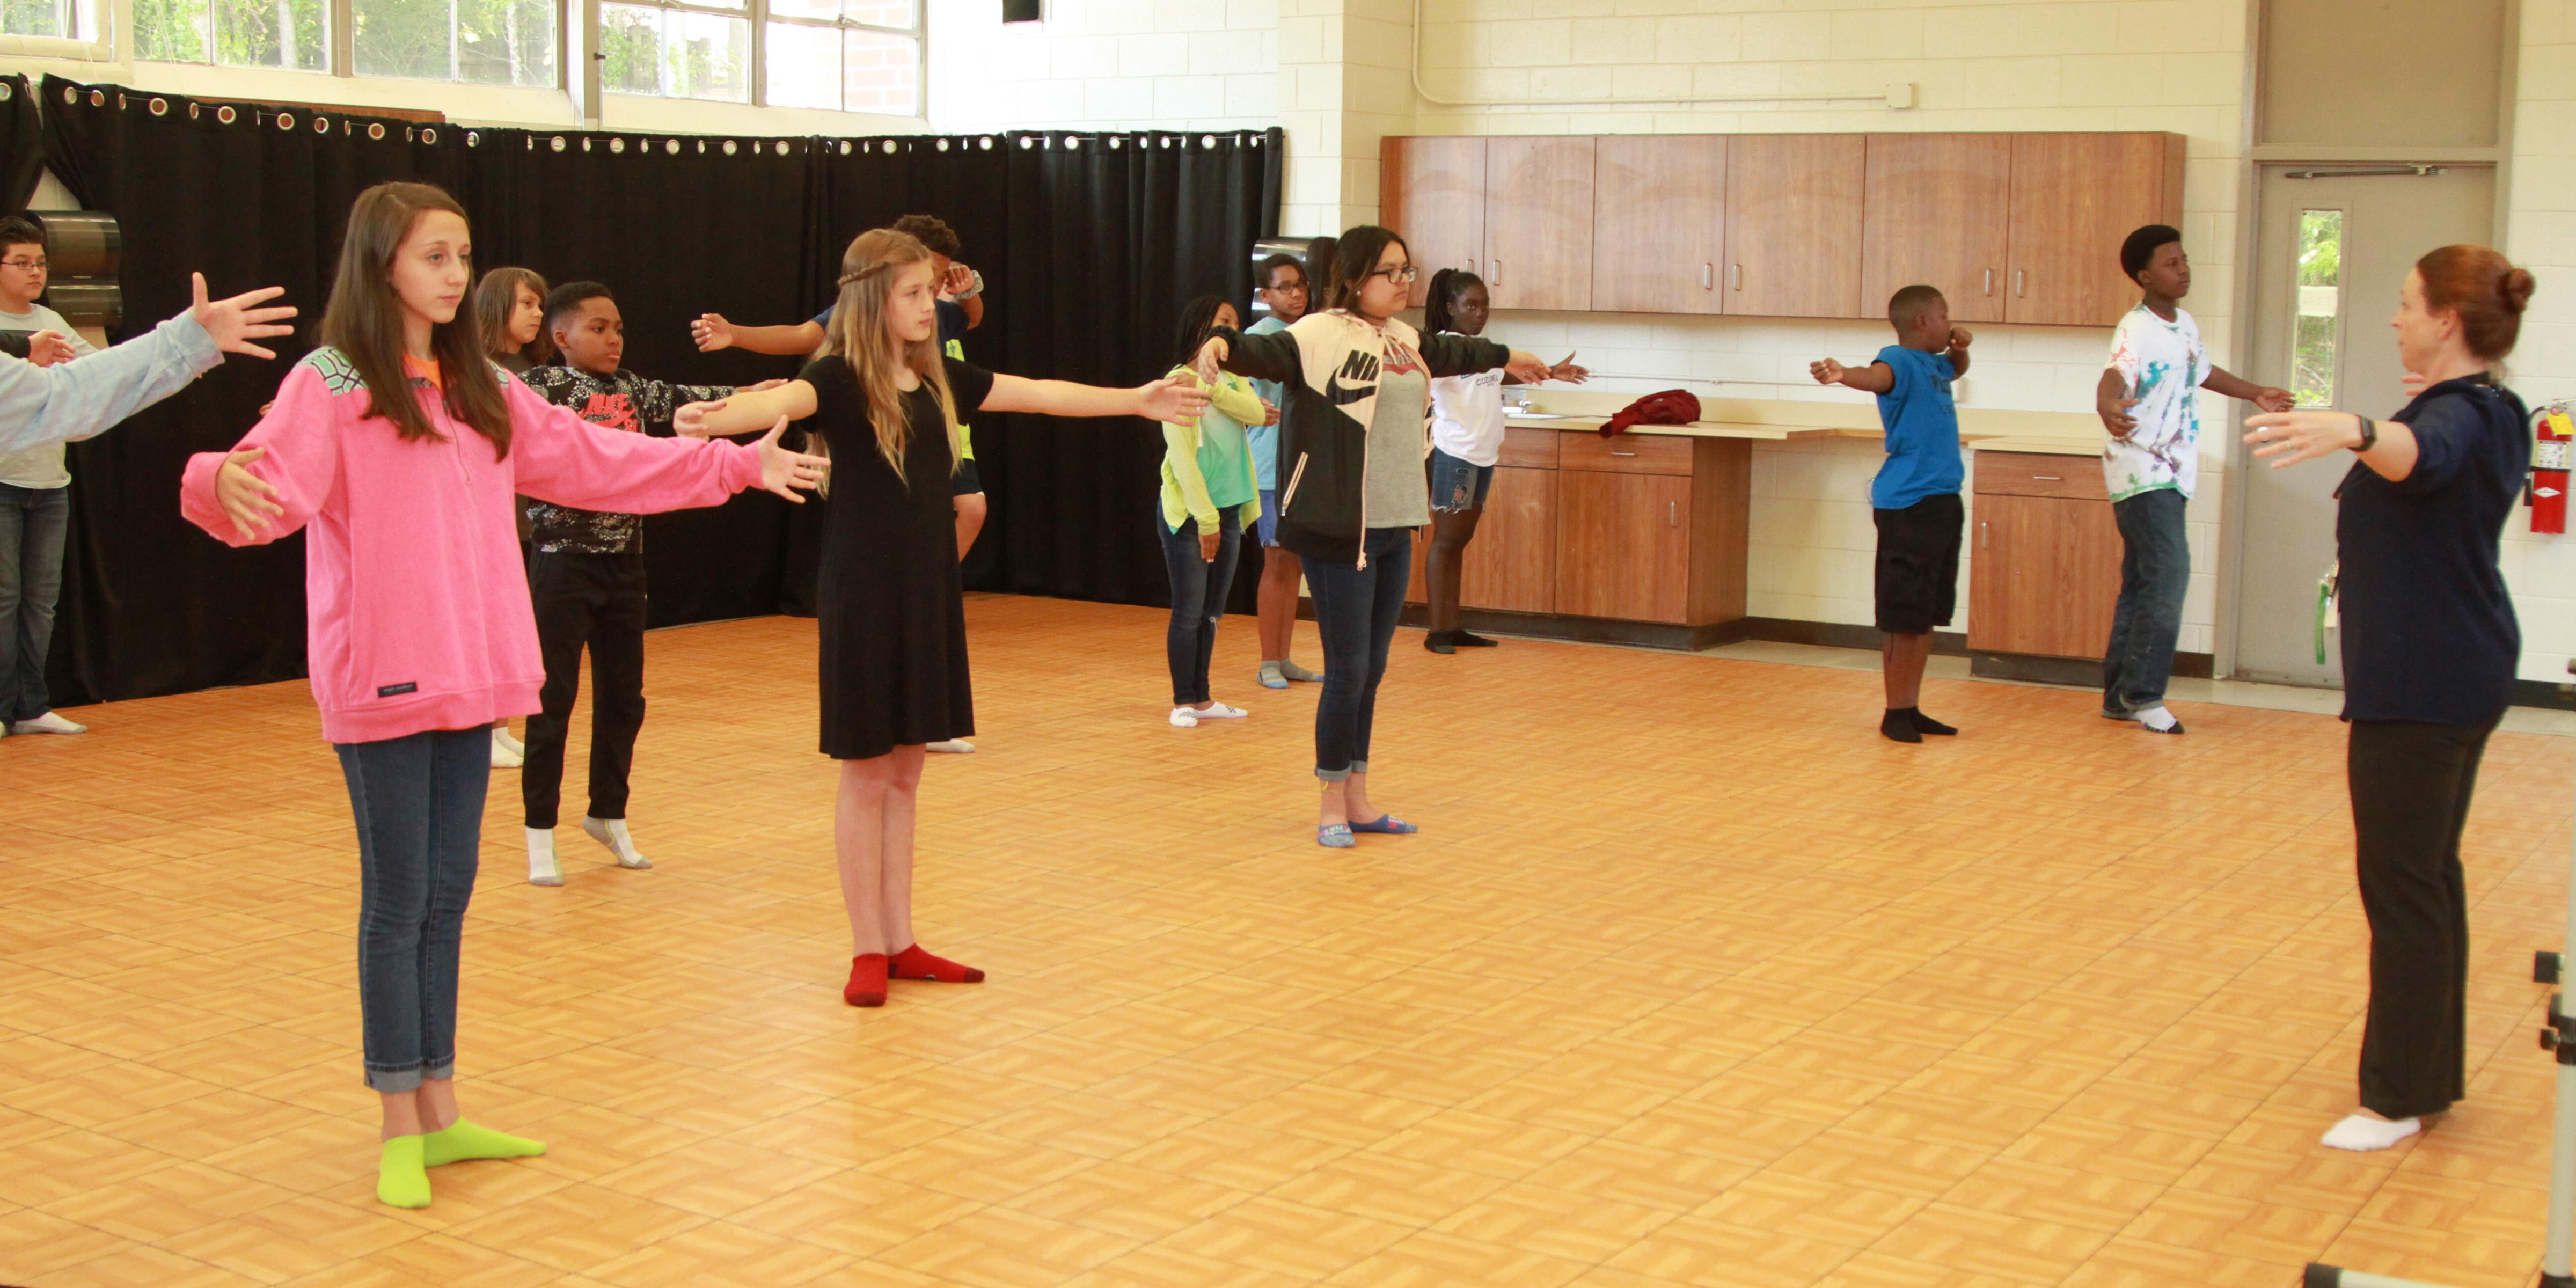 Students taking a dance class